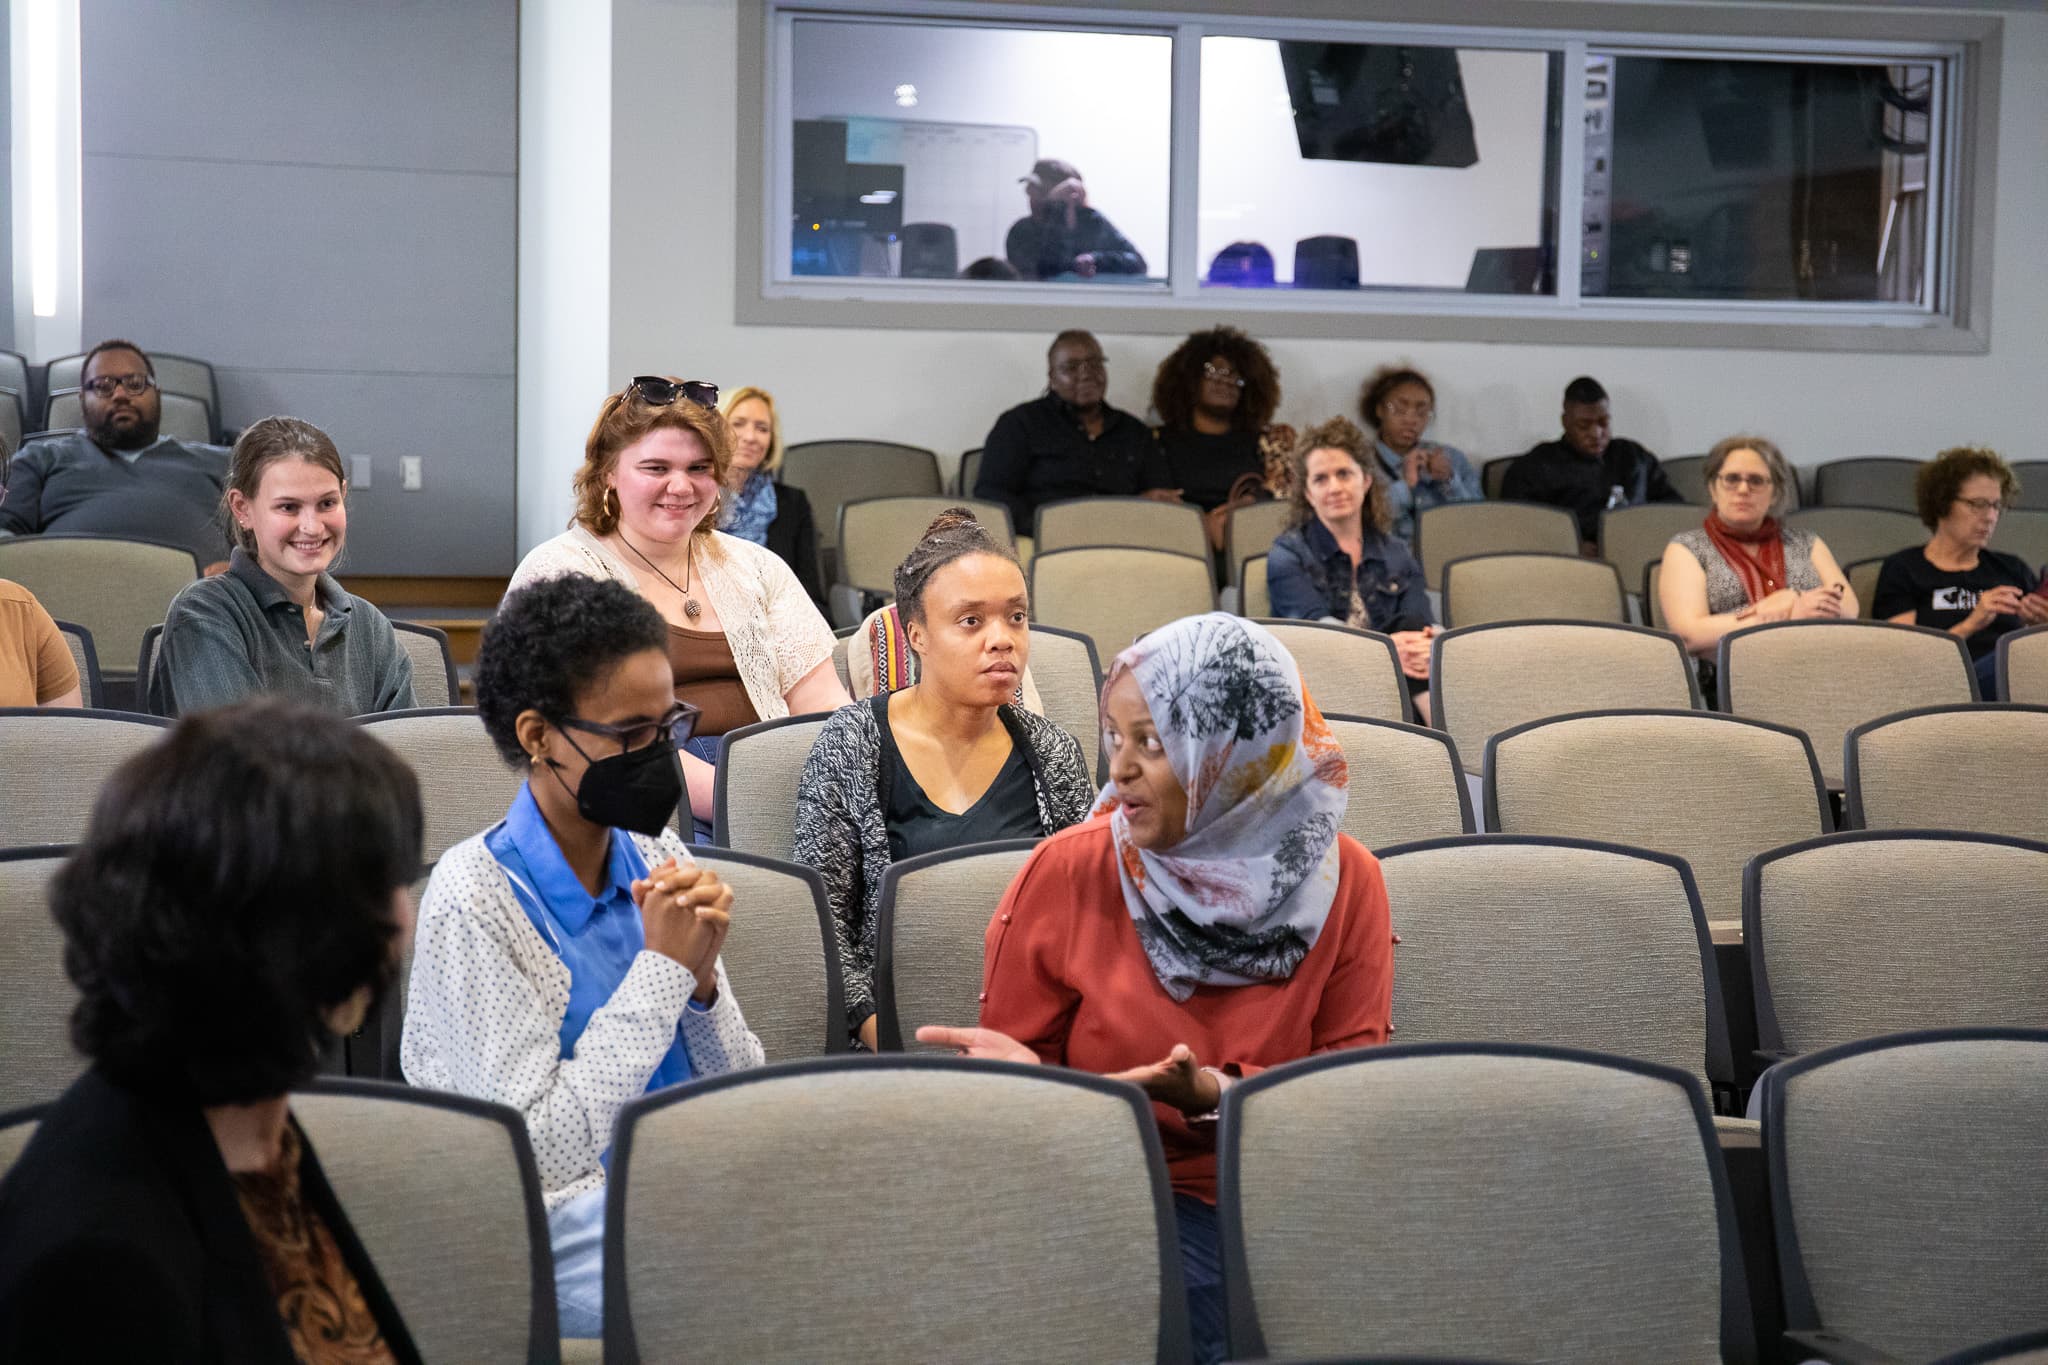 In the center of the image, one of the featured storytellers shares her experience participating in the documentary alongside a student. Members of the audience sit around them in an auditorium.